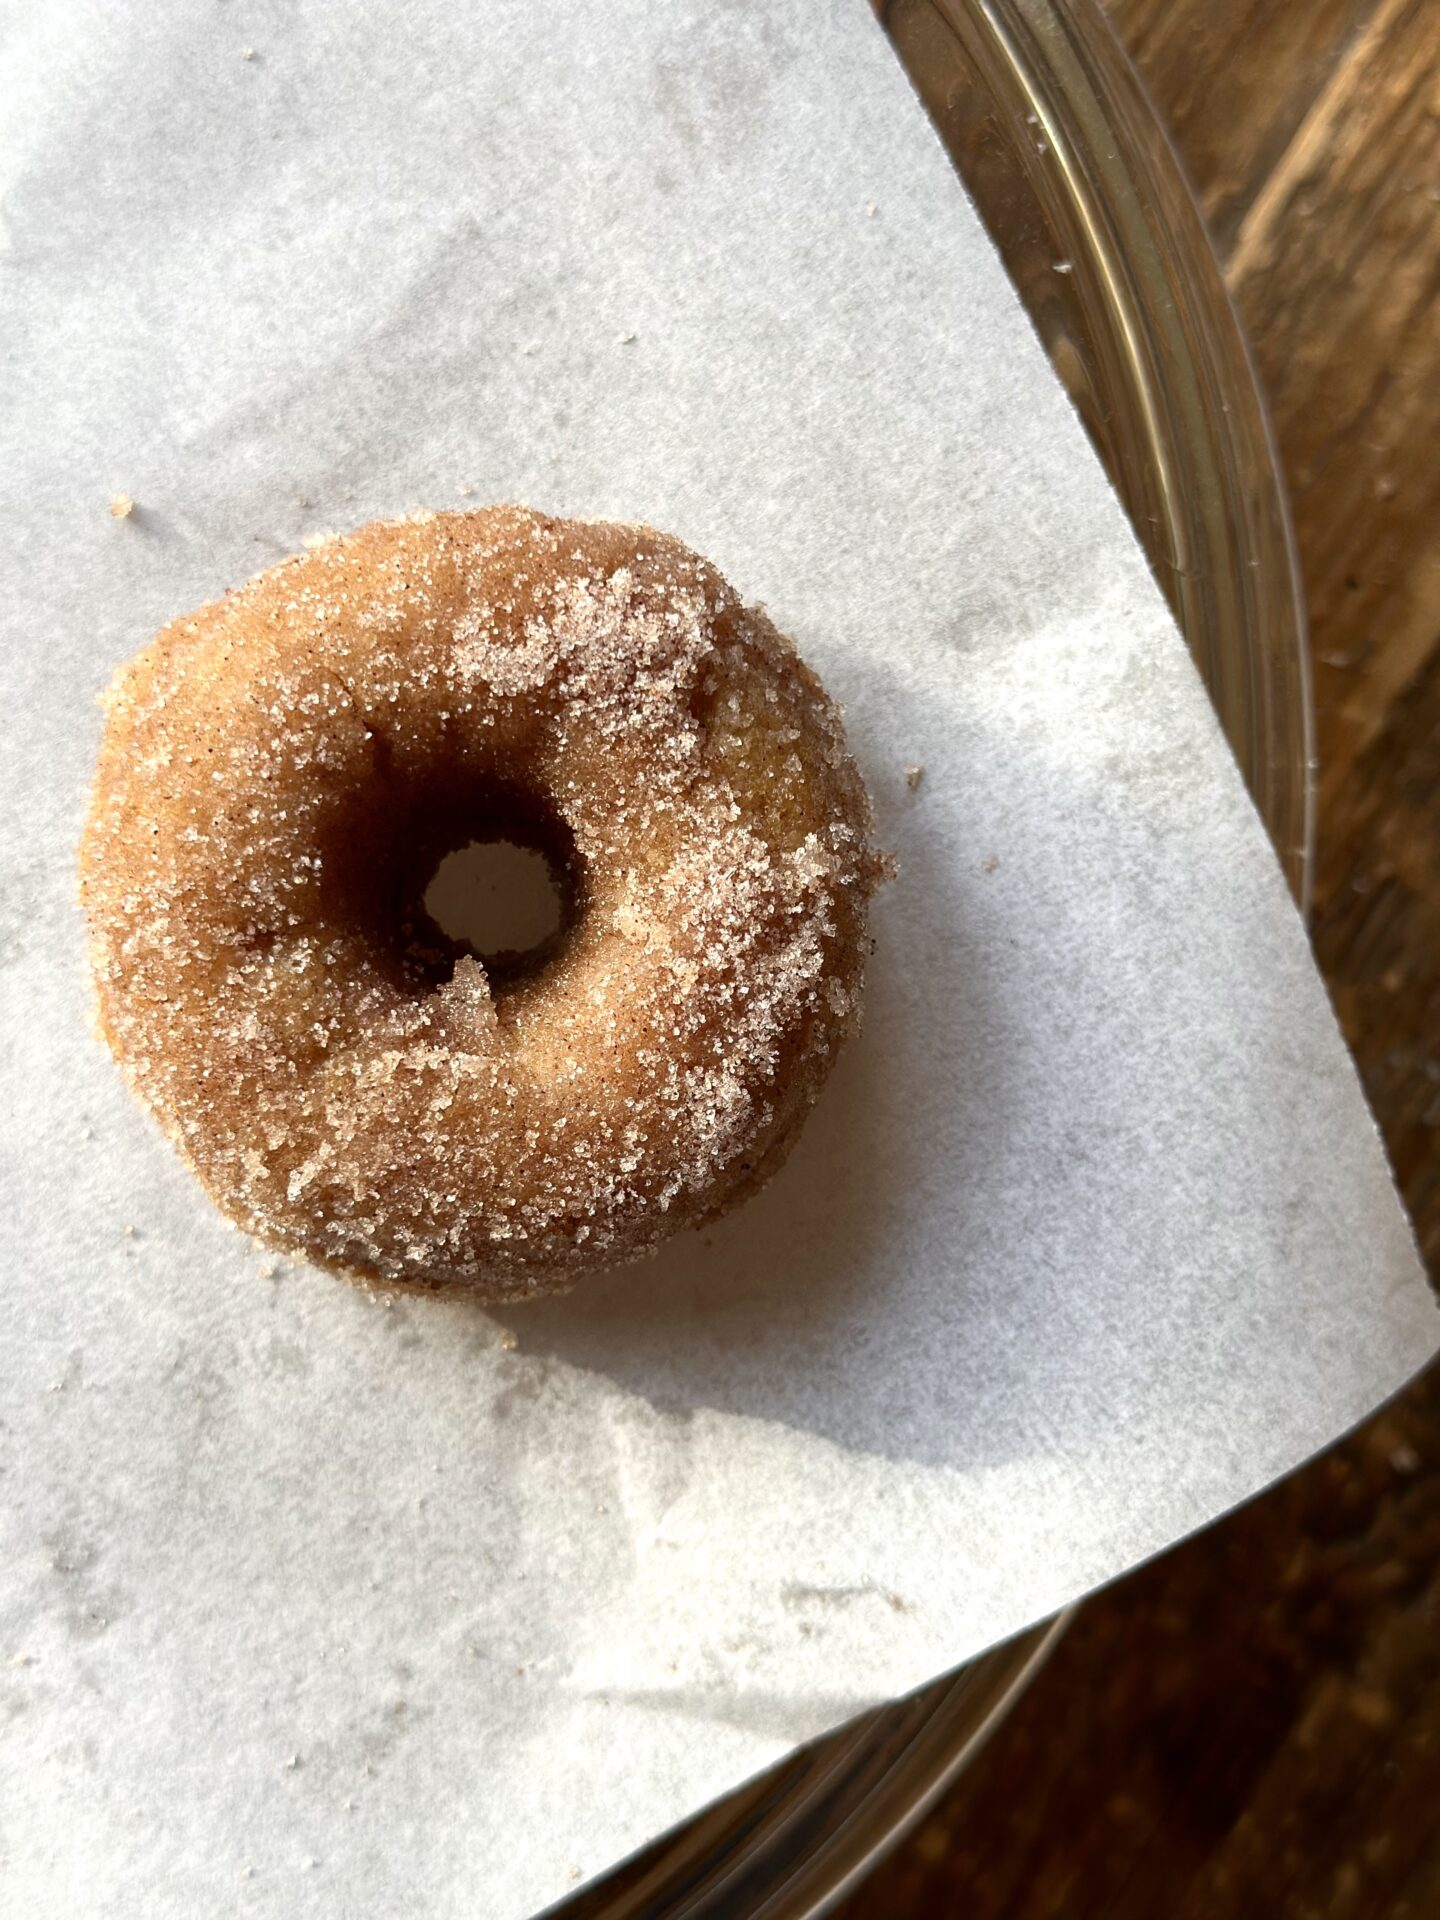 A single cinnamon sugar donut is seen from above on a piece of white parchment paper